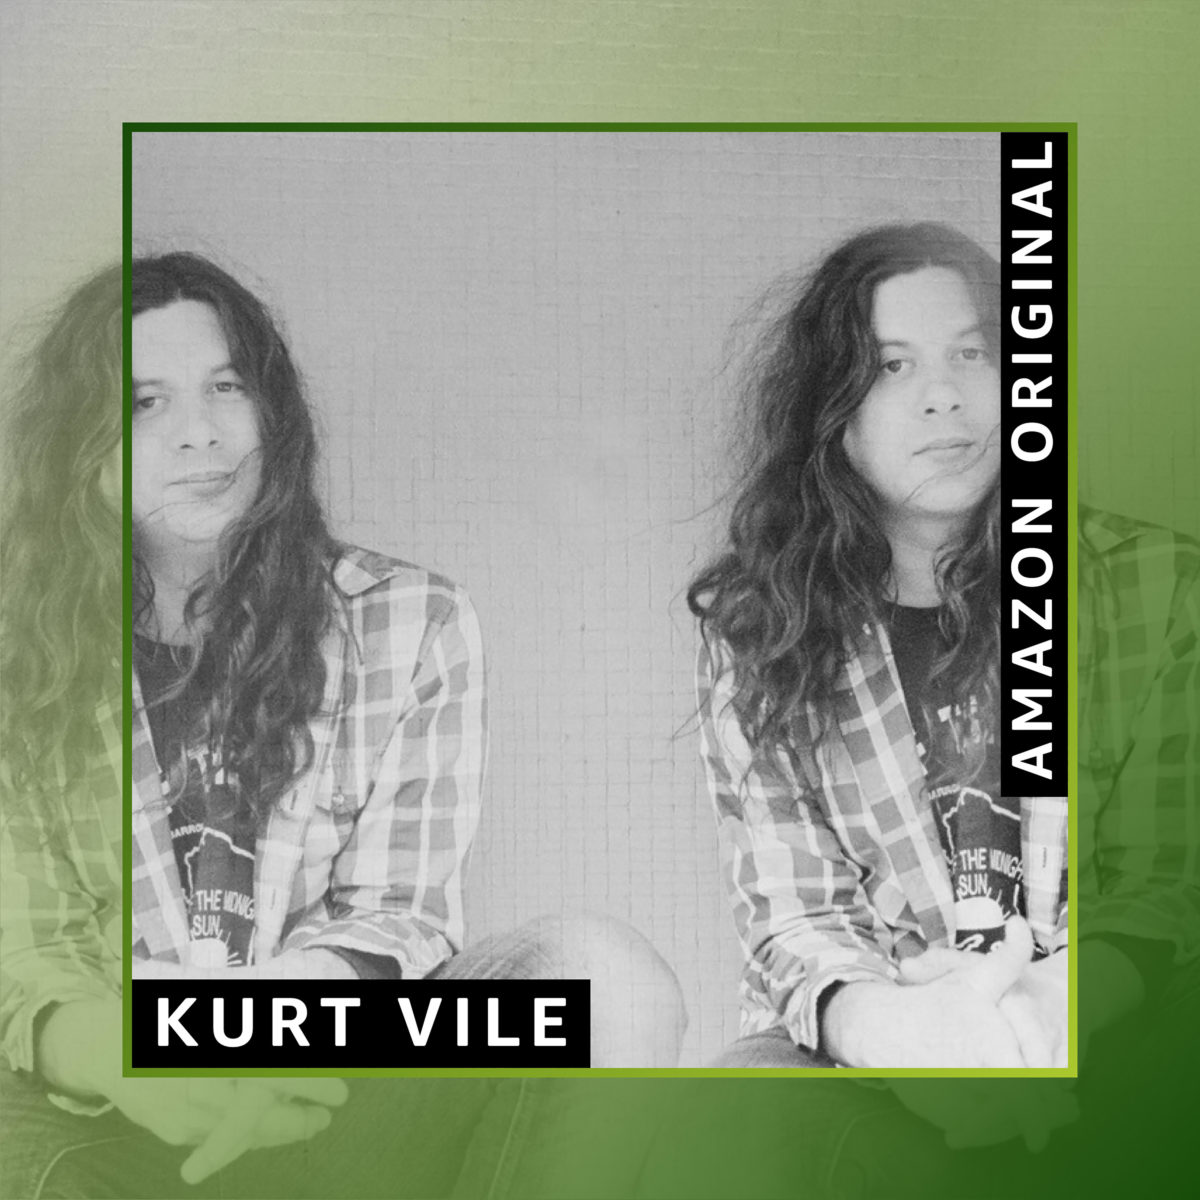 kurt vile timing is everything and i'm falling behind amazon tour